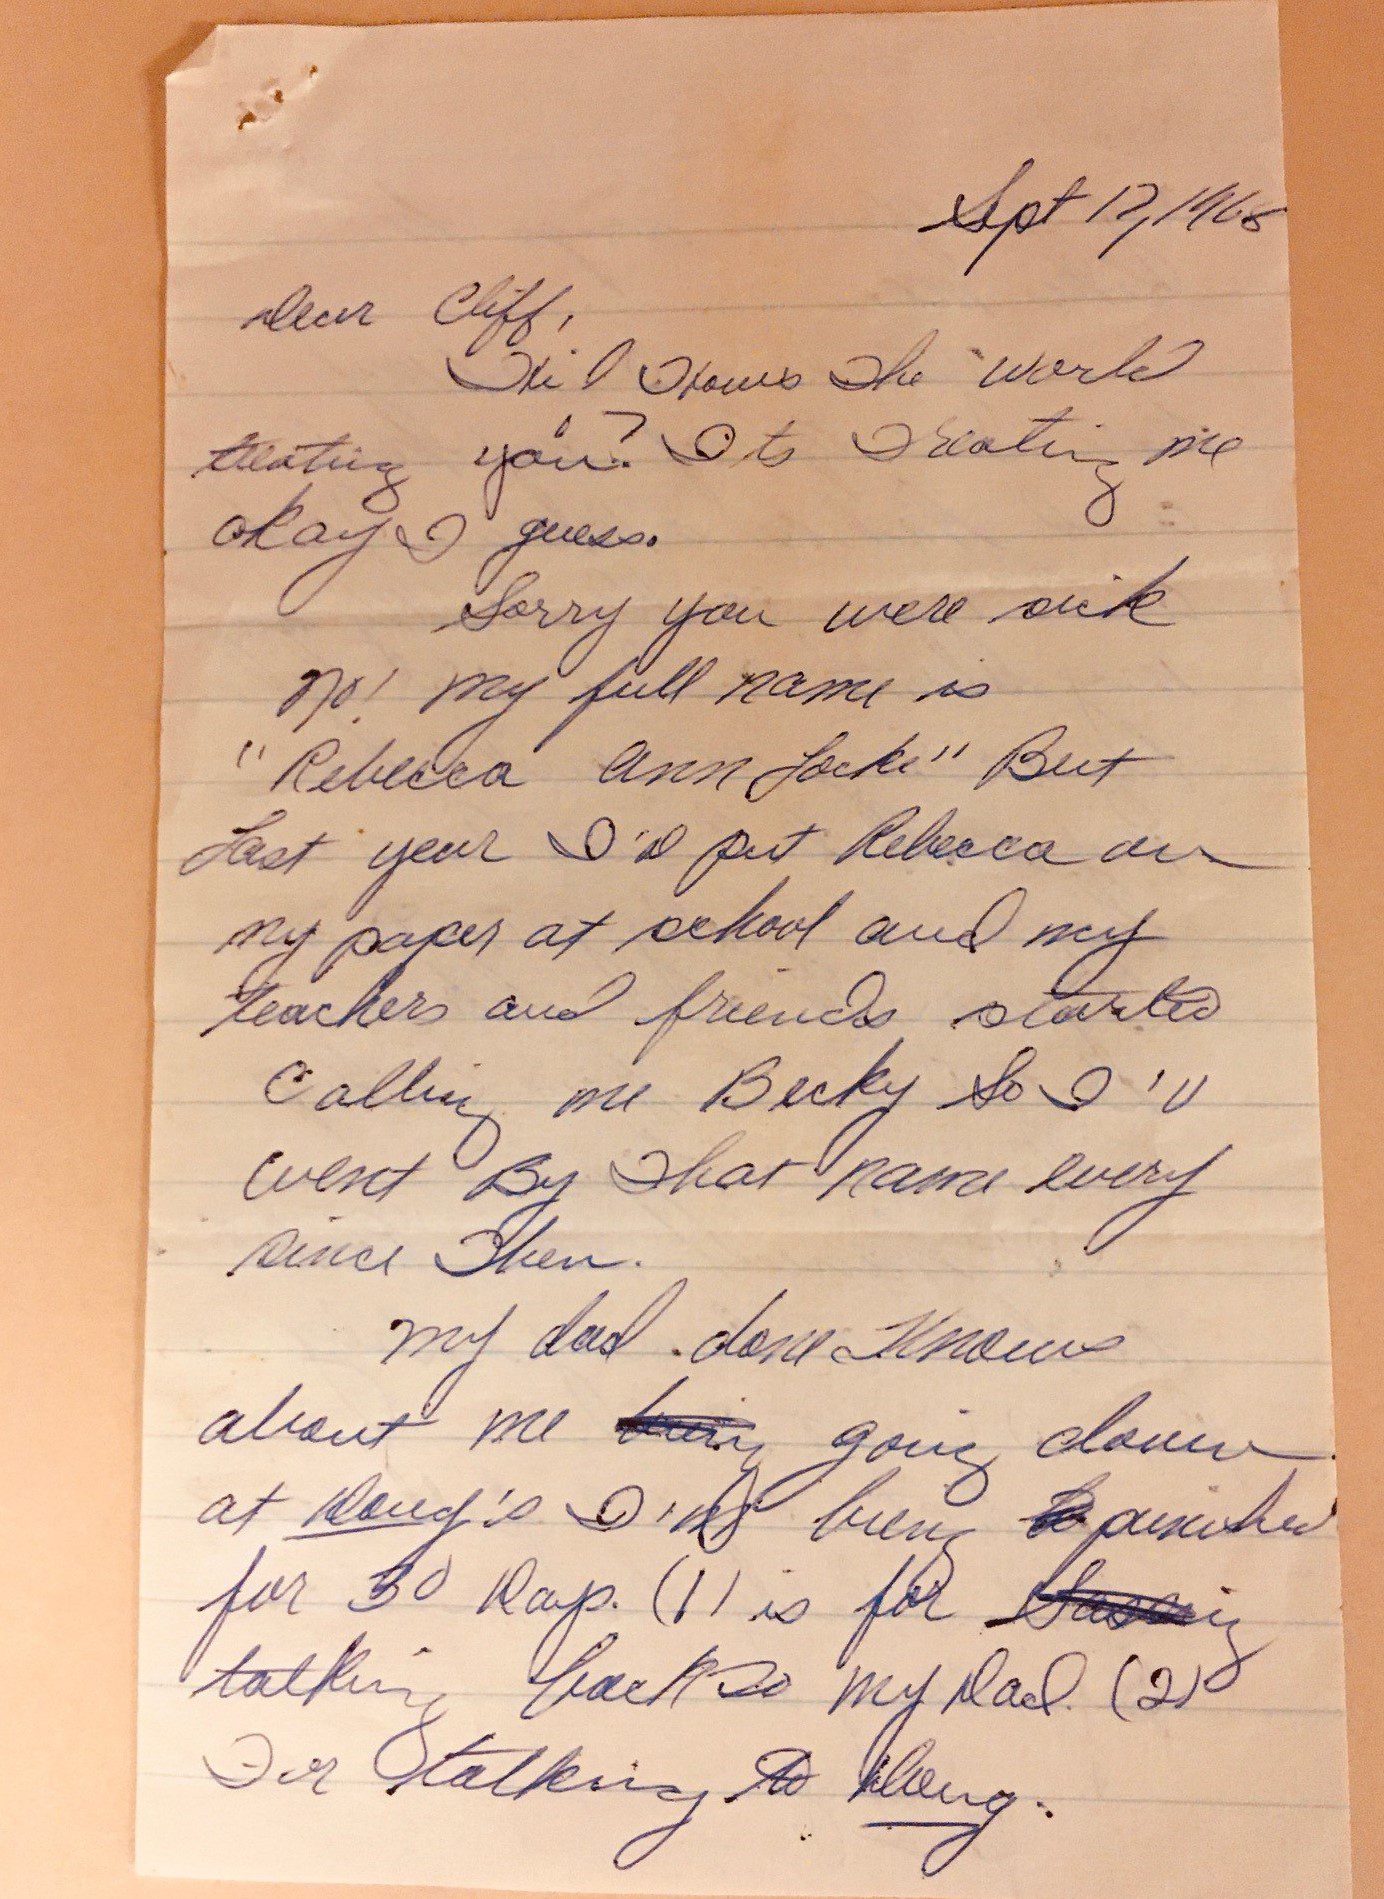 Letter written to Cliff Spires from Becky in Dayton, Ohio